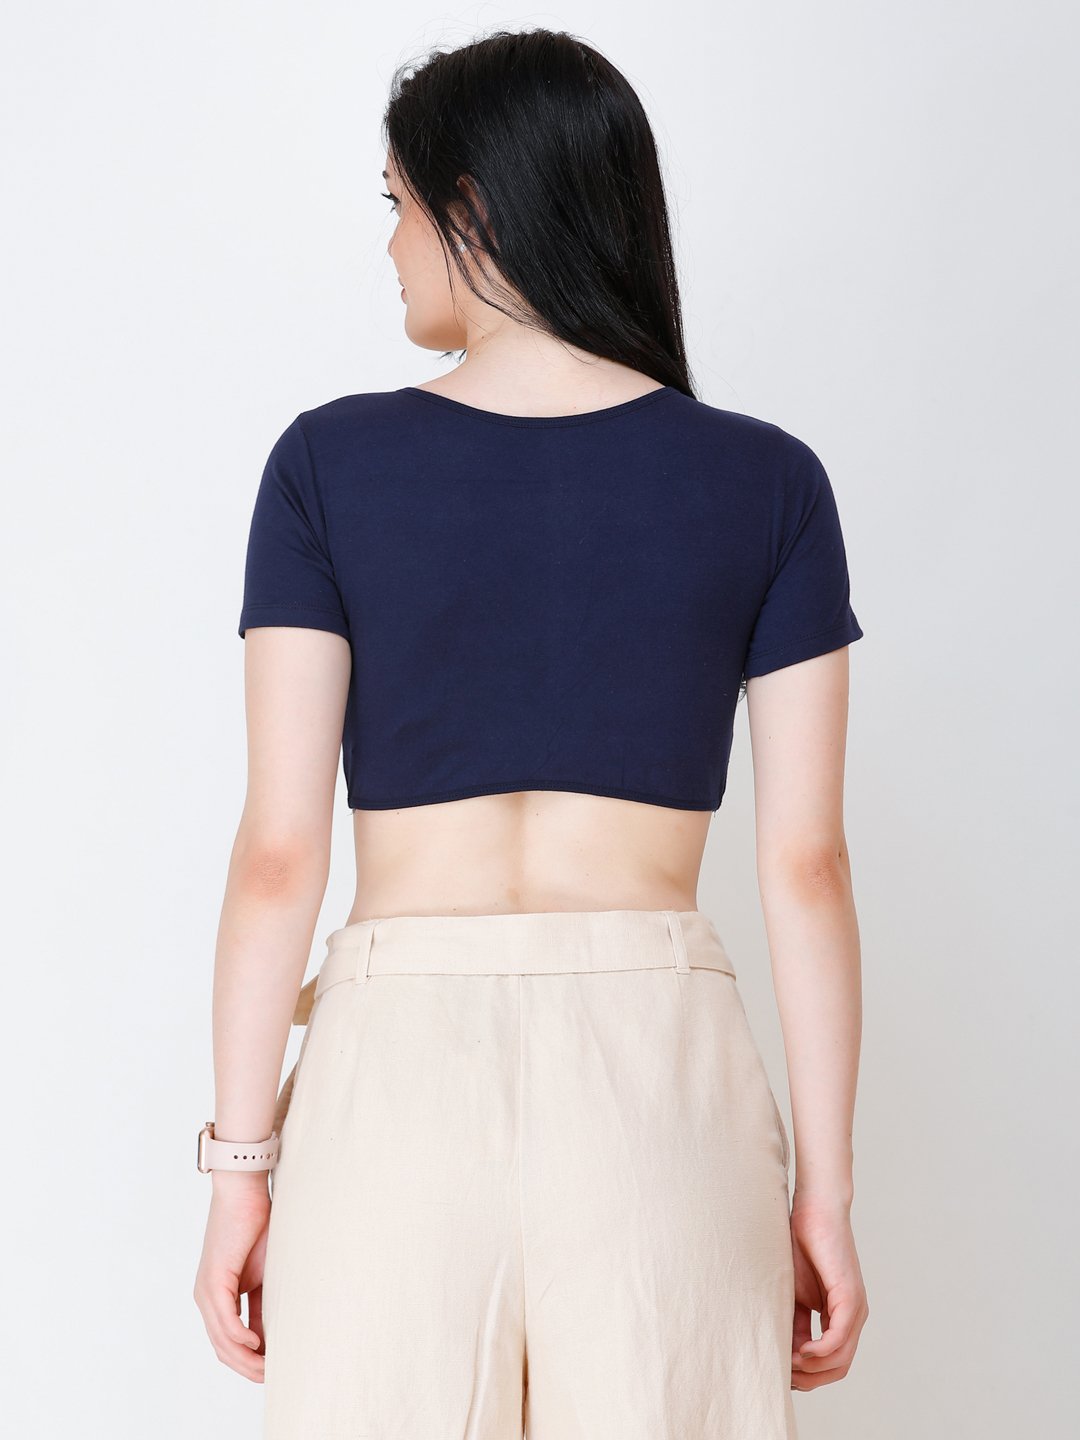 SCORPIUS Knotted navy blue crop top